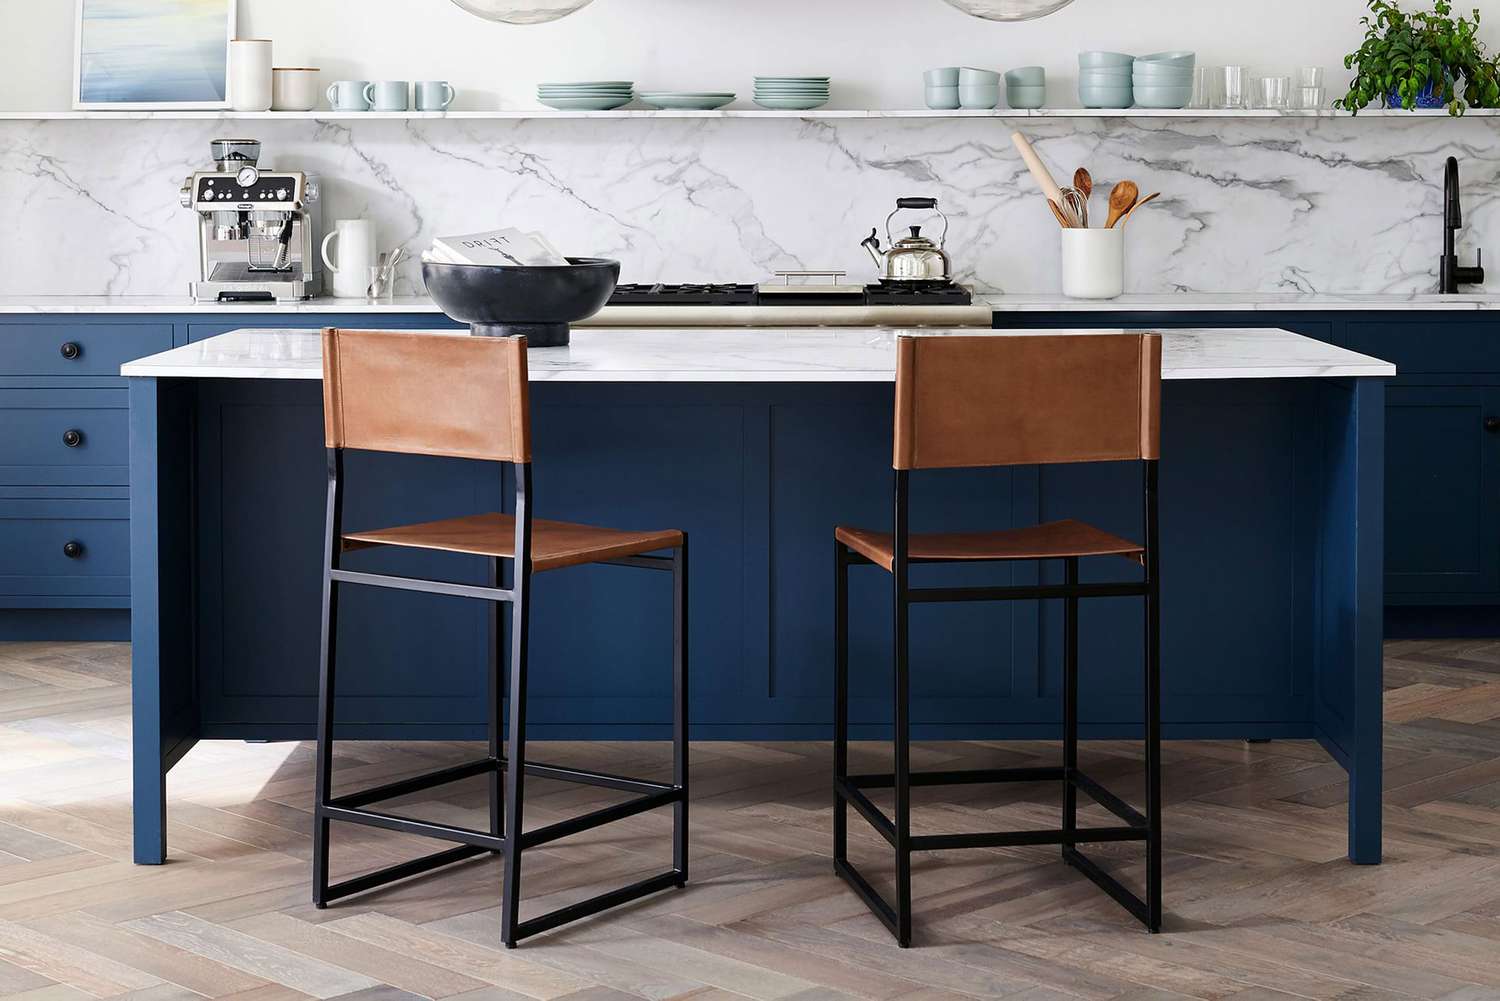 Replace bar stools with trending benches in a kitchen